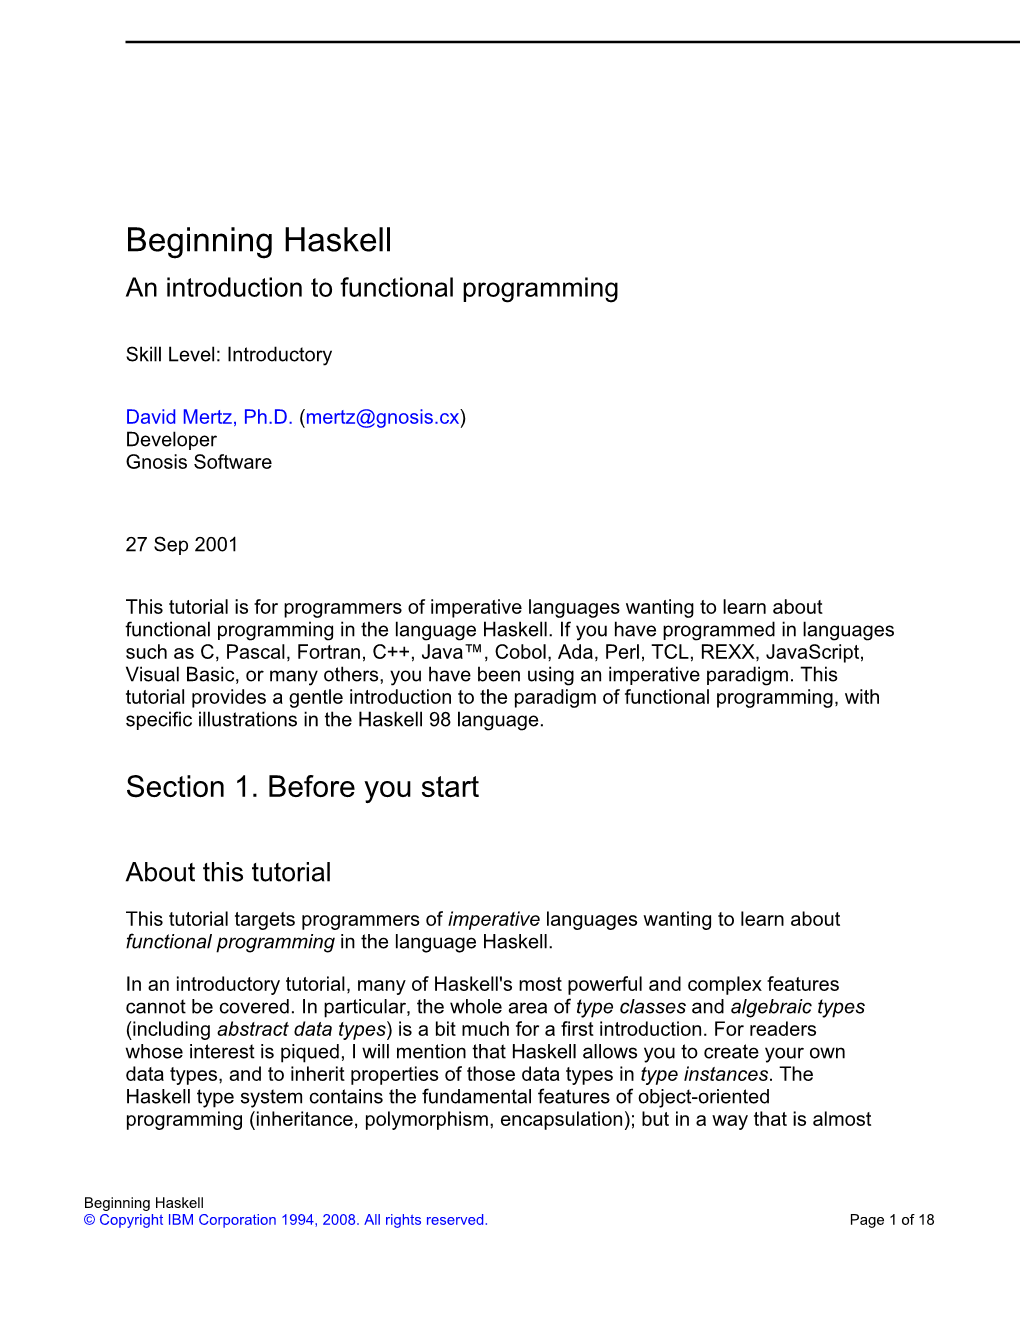 Beginning Haskell an Introduction to Functional Programming